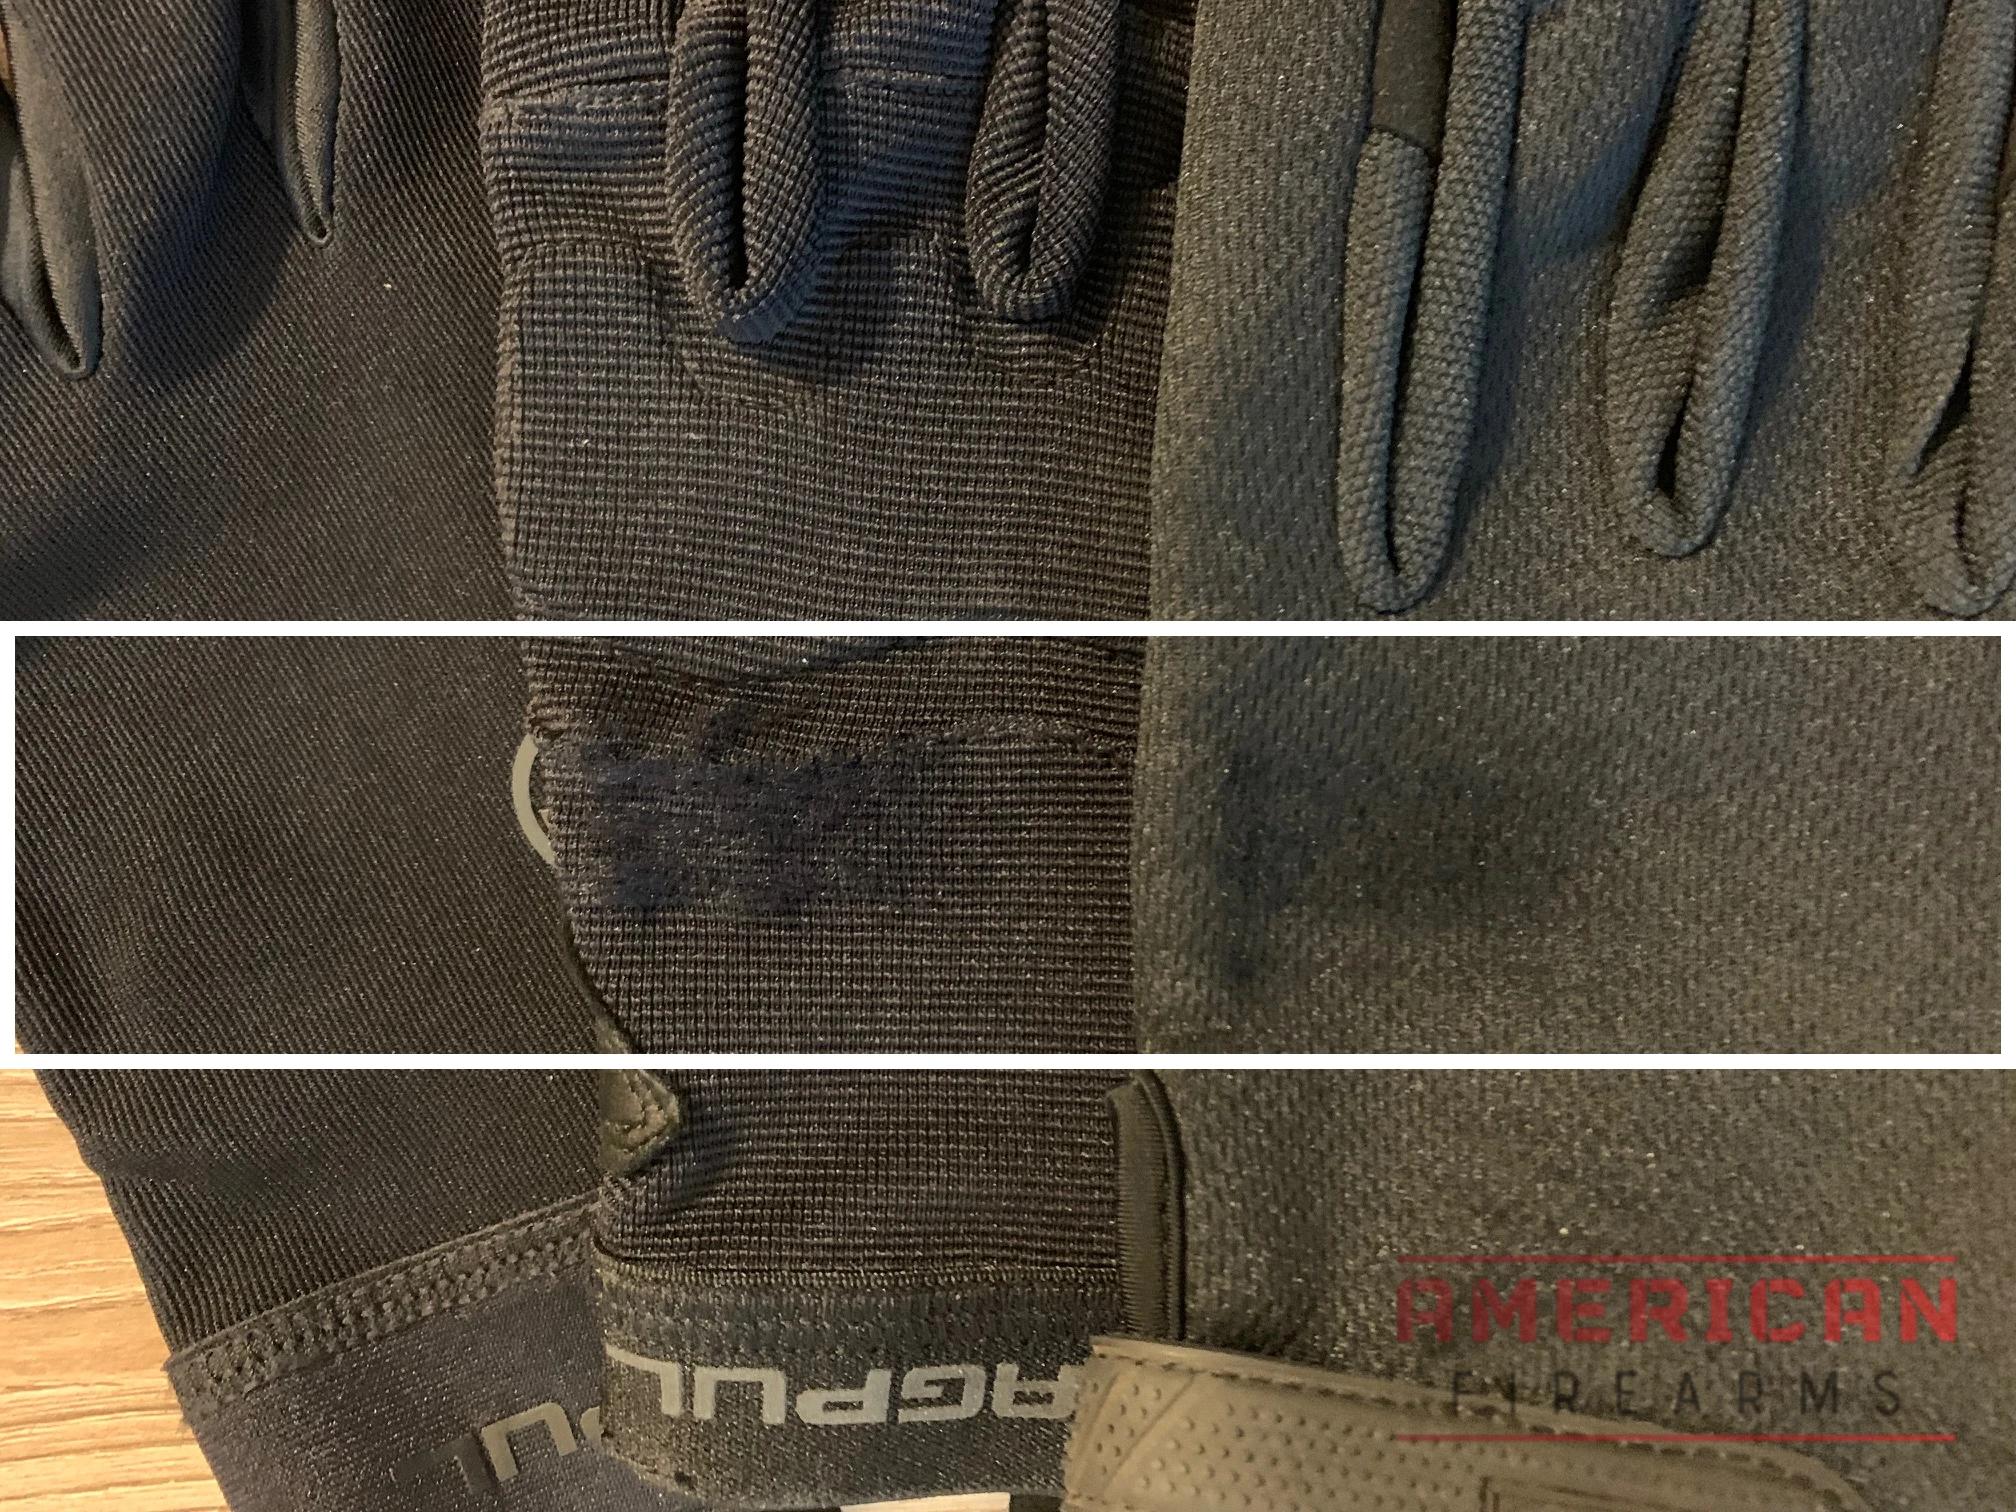 Shooting Glove Velcro Test Results: the Magpul Technical Glove 2.0 (left) had almost no snagging while the Magpul Patrols (center) had the most. The OZEROs (right) were somewhere in the middle. 